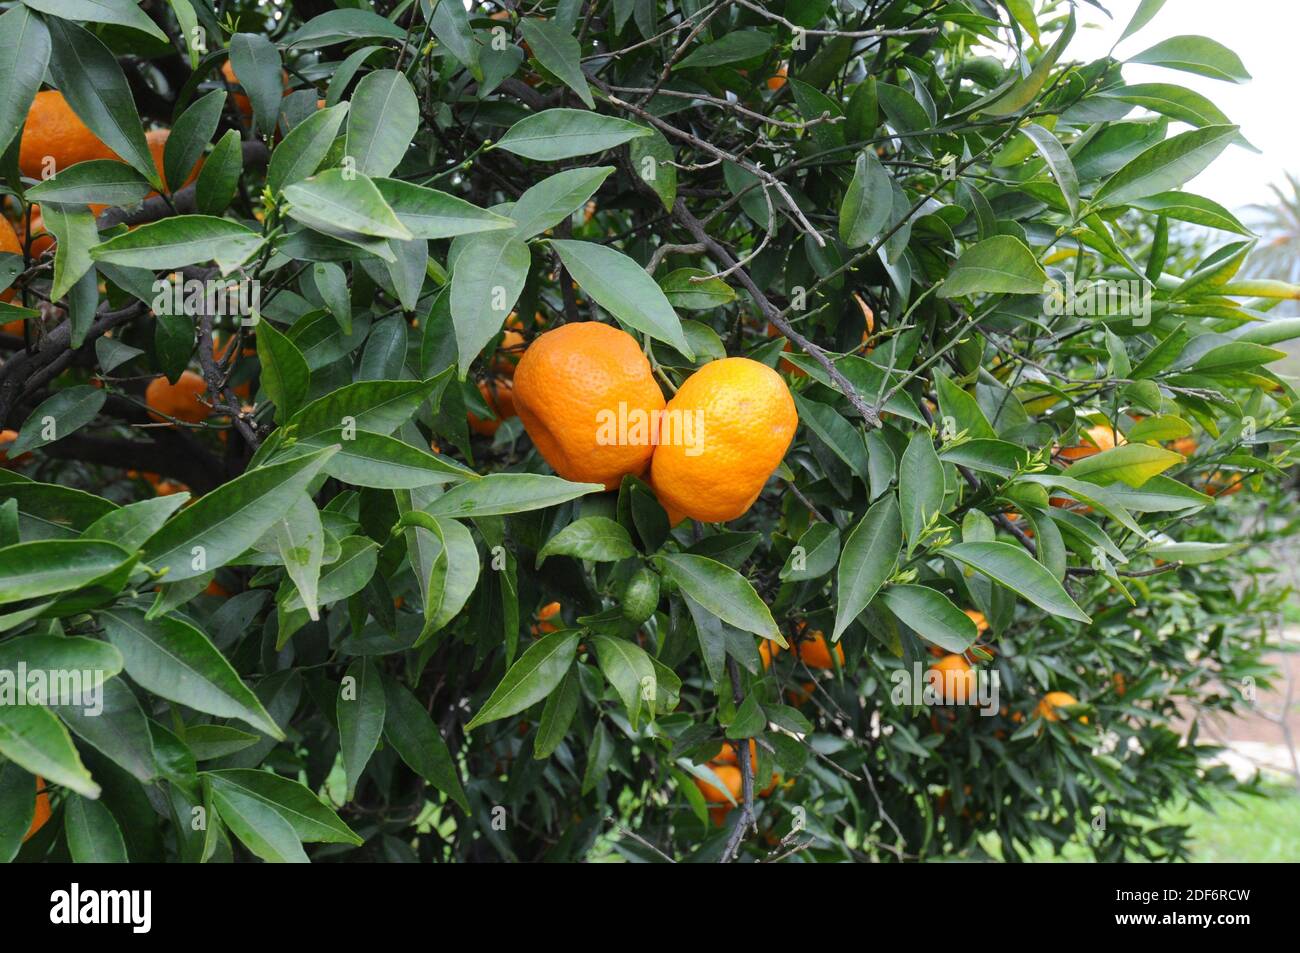 Mandarin orange (Citrus reticulata) is a small tree native to south China. Its fruits (mandarines) are edible. Fruits and leaves detail. Stock Photo